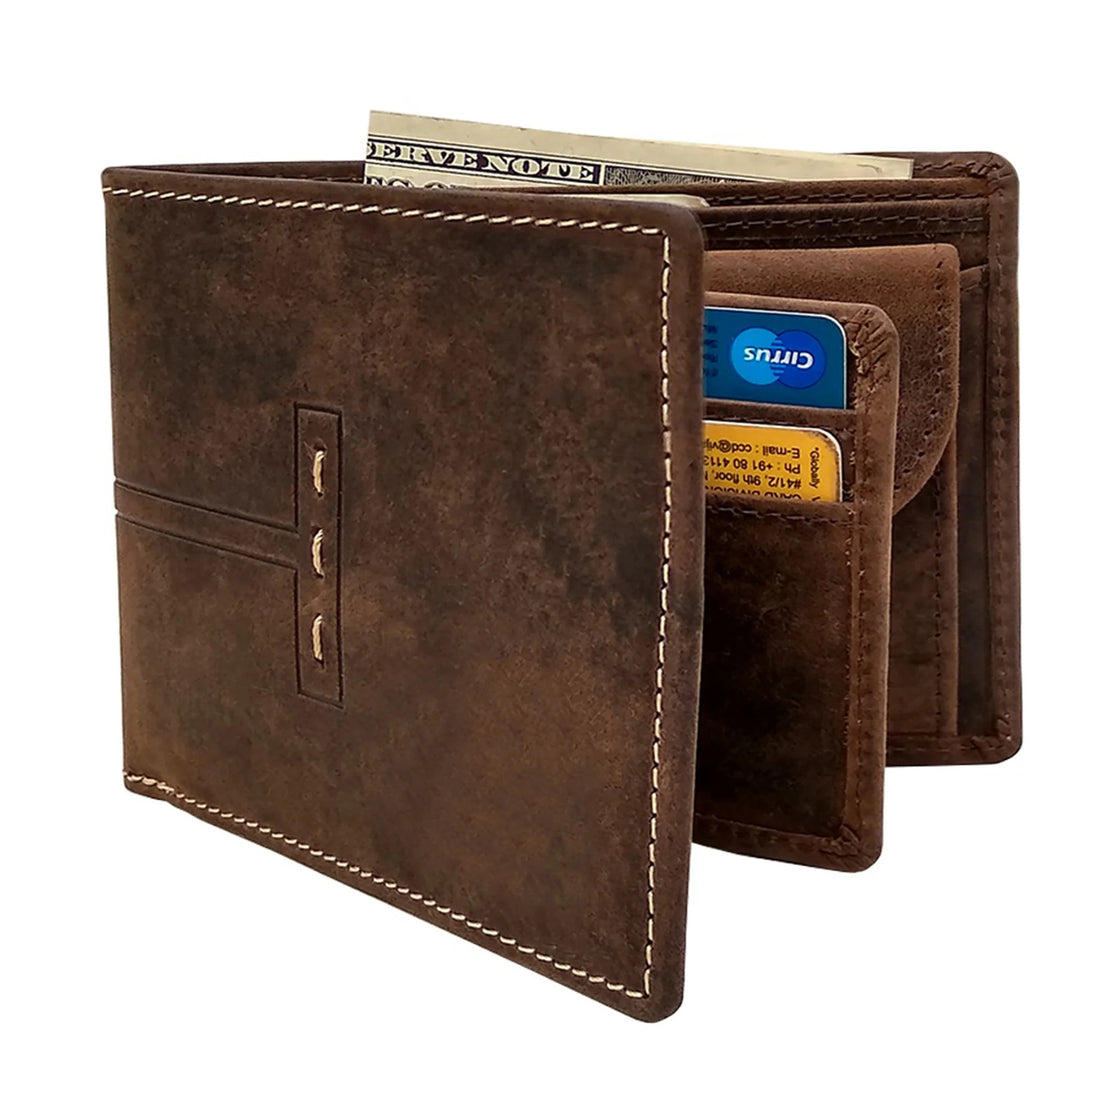 Mens Leather Wallet With Coin Pocket All Currency Friendly Rugged, Rustic  Appeal Listing 003 